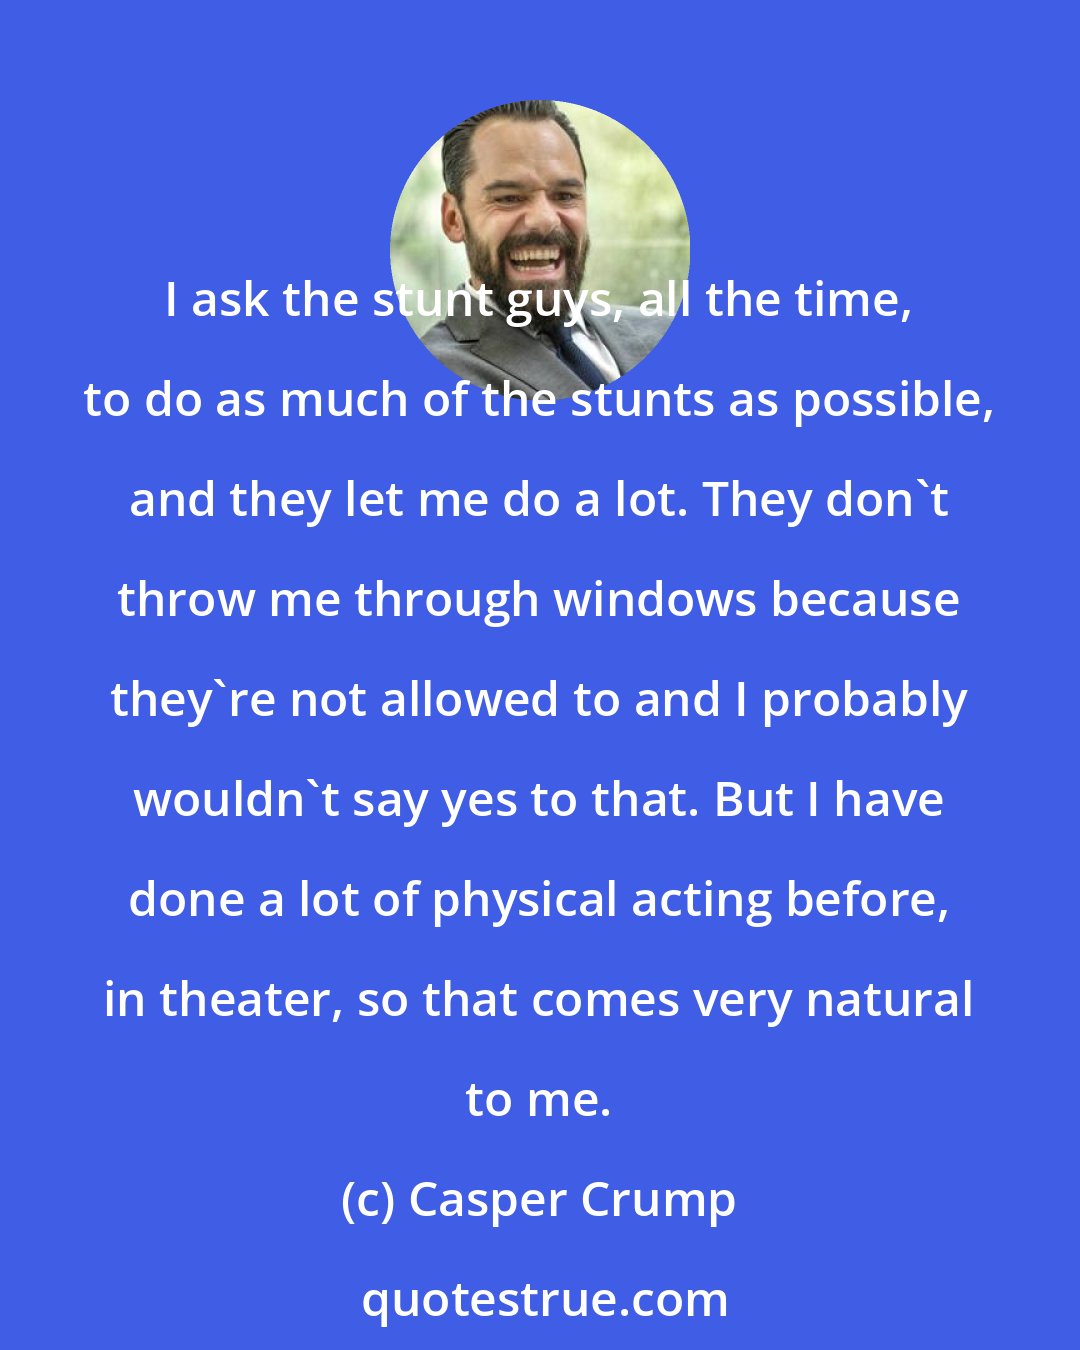 Casper Crump: I ask the stunt guys, all the time, to do as much of the stunts as possible, and they let me do a lot. They don't throw me through windows because they're not allowed to and I probably wouldn't say yes to that. But I have done a lot of physical acting before, in theater, so that comes very natural to me.